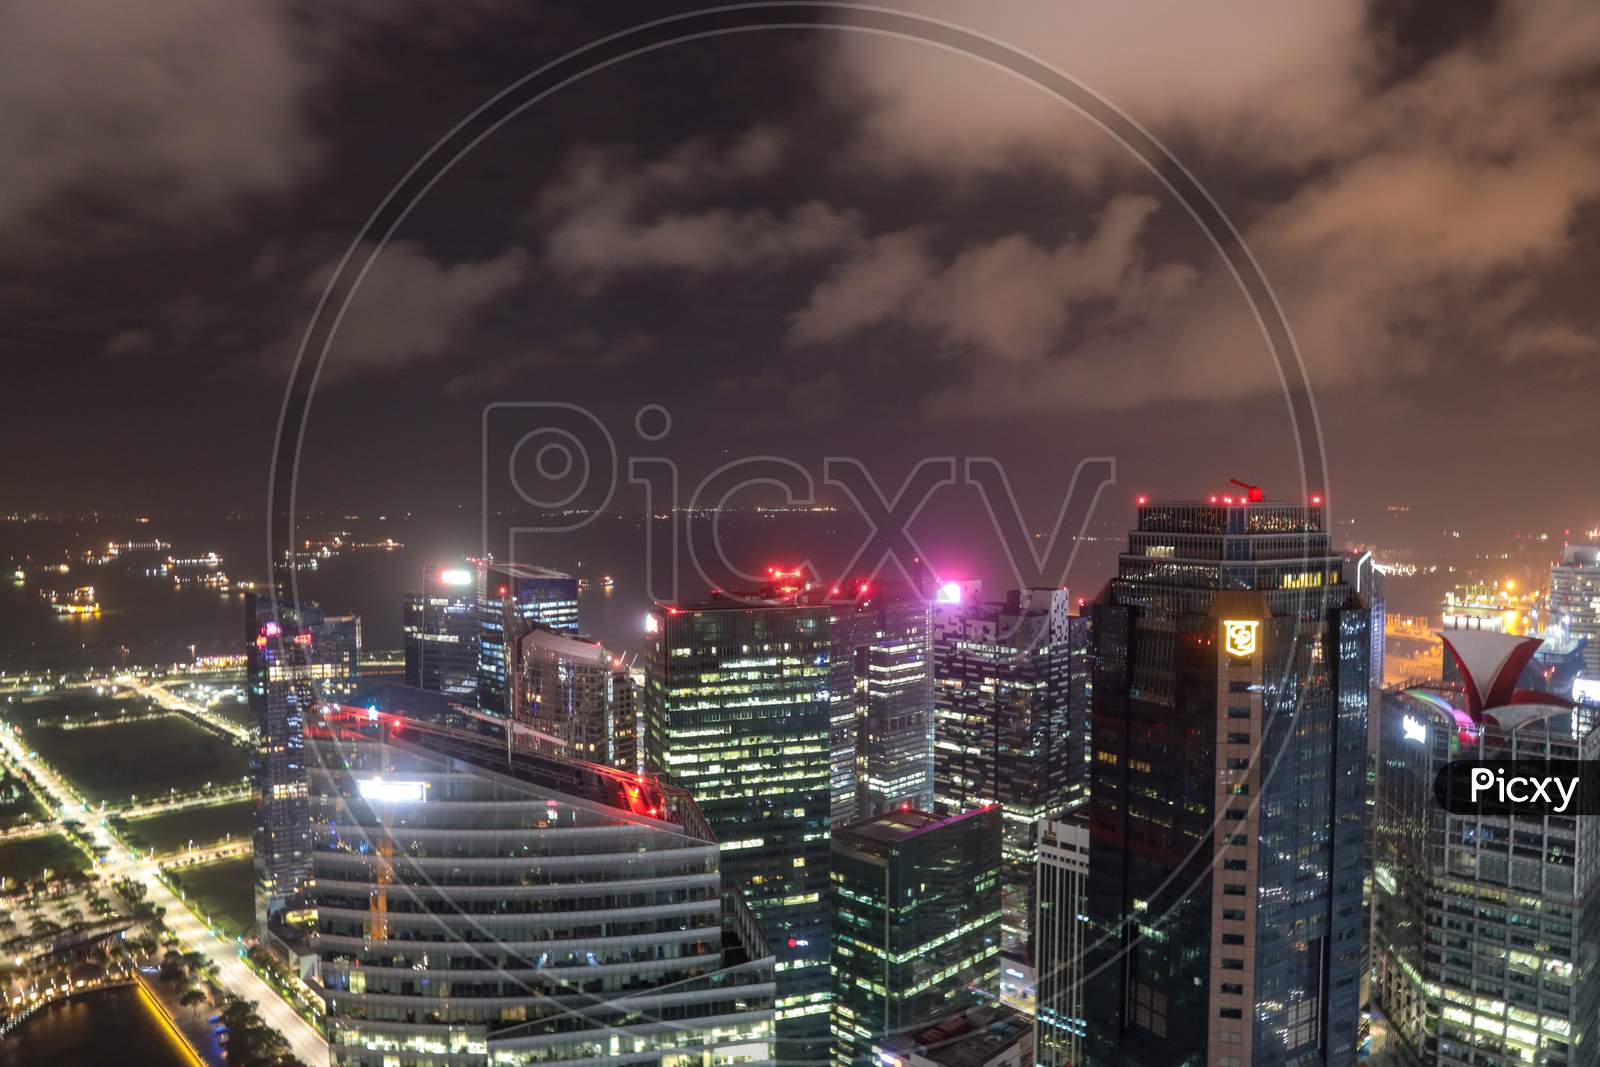 Singapore Urban City  Night Cityscape With Night Lights And Buildings